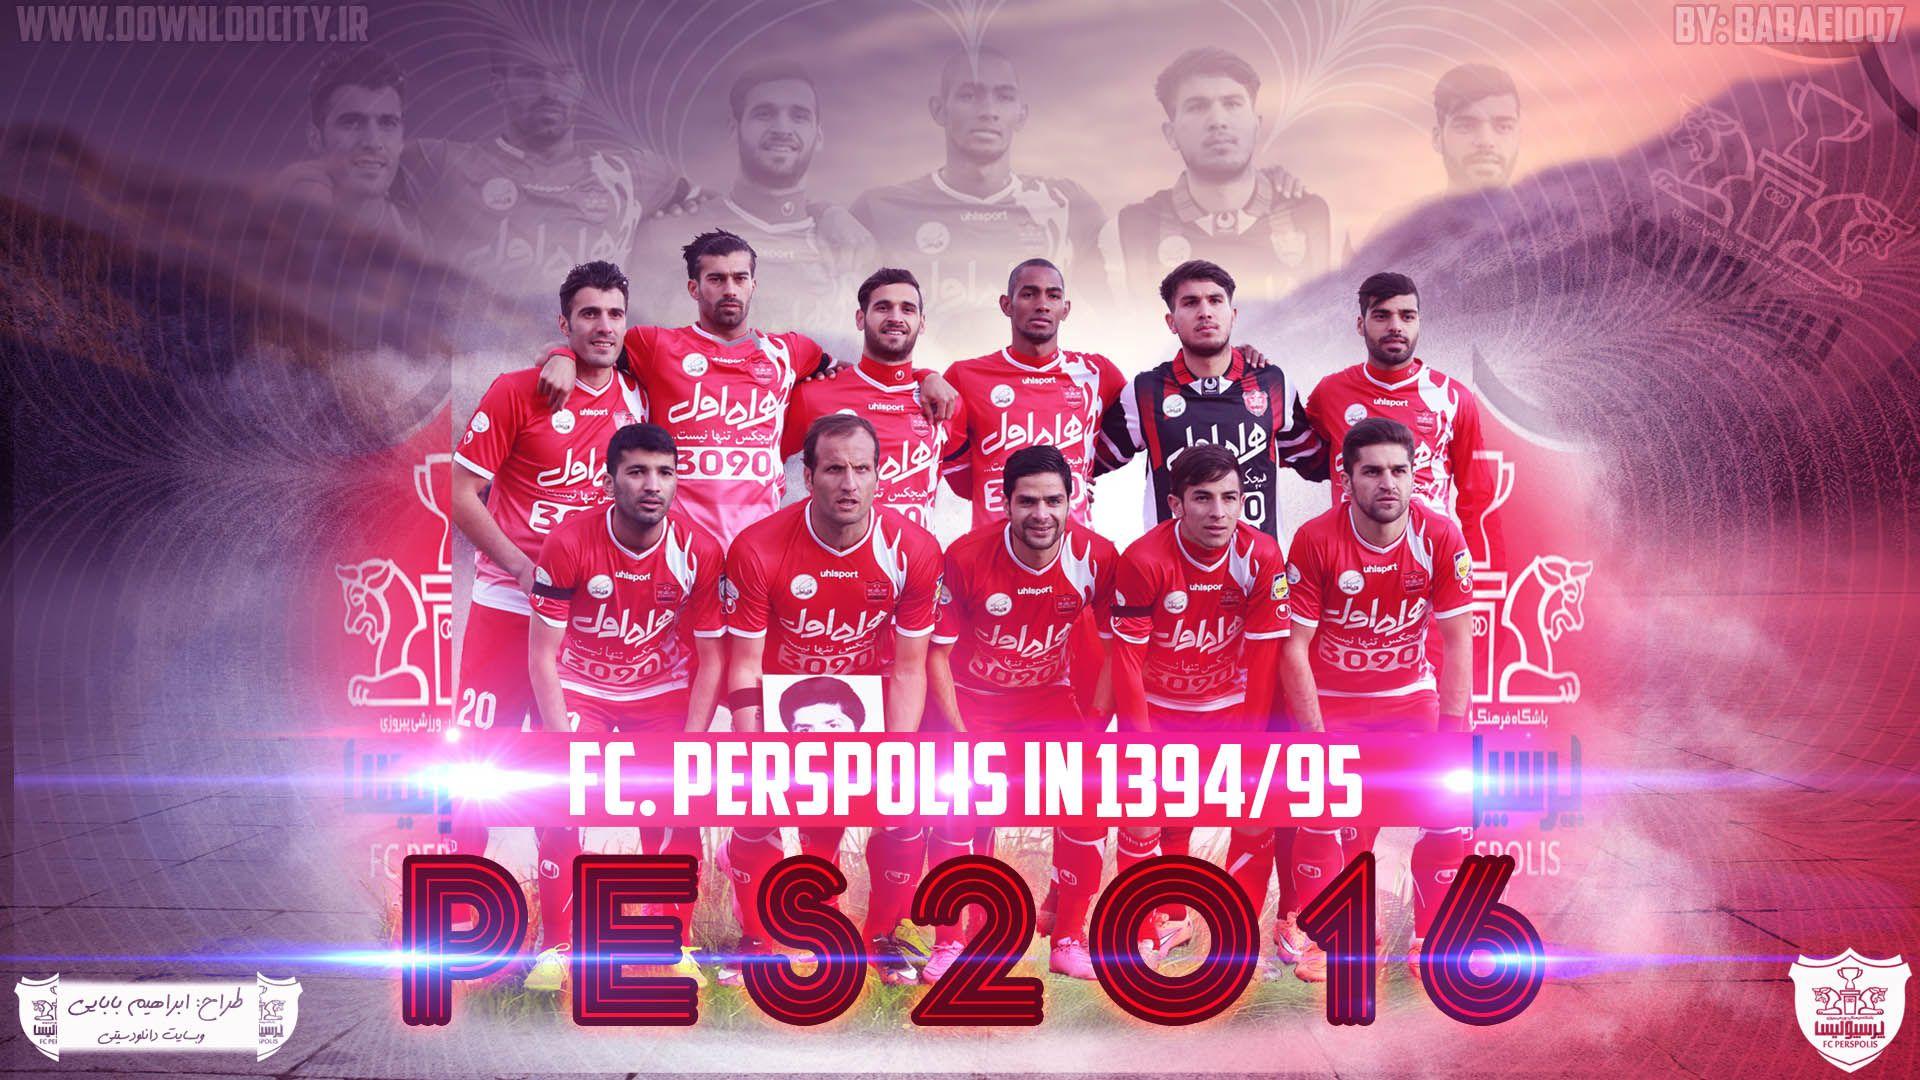 1920x1080 PES 2016 Perspolis 1395 StartScreen By downlodcity